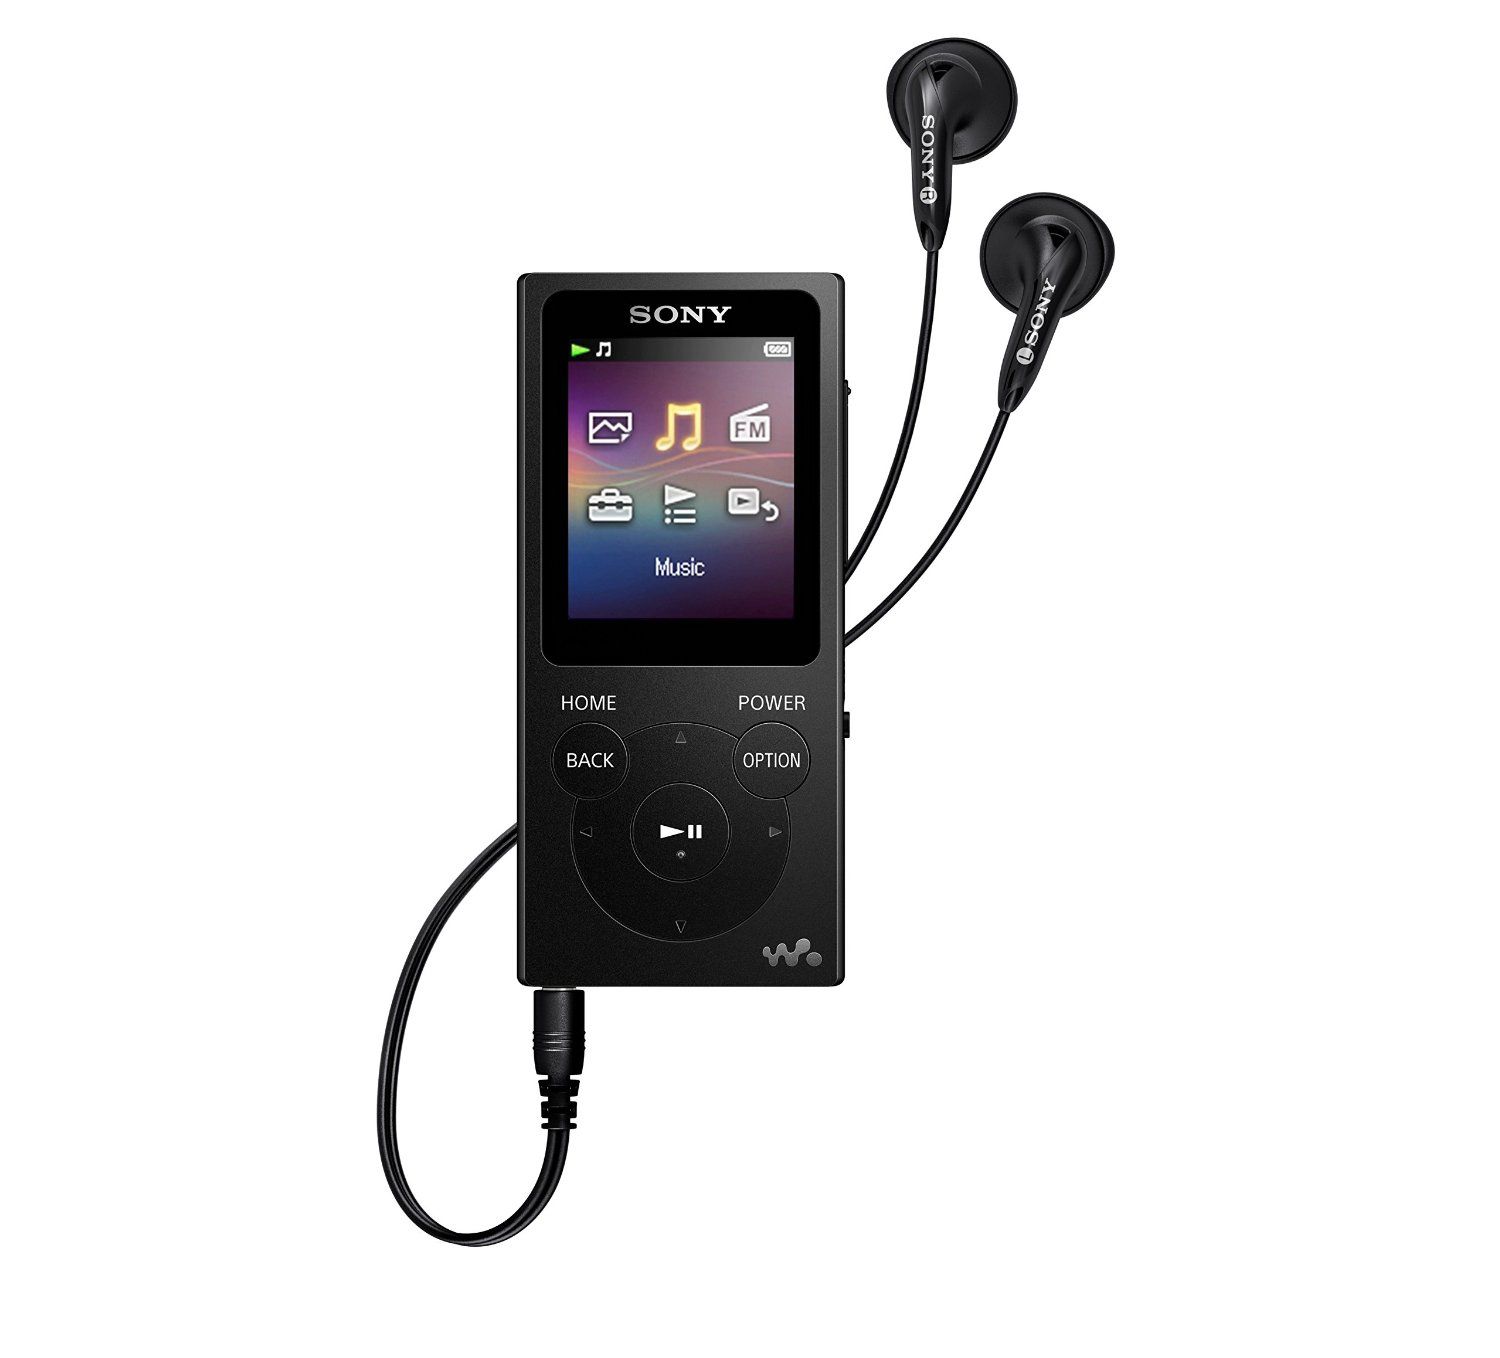 The 10 Best Budget MP3 Players to Buy in 2018